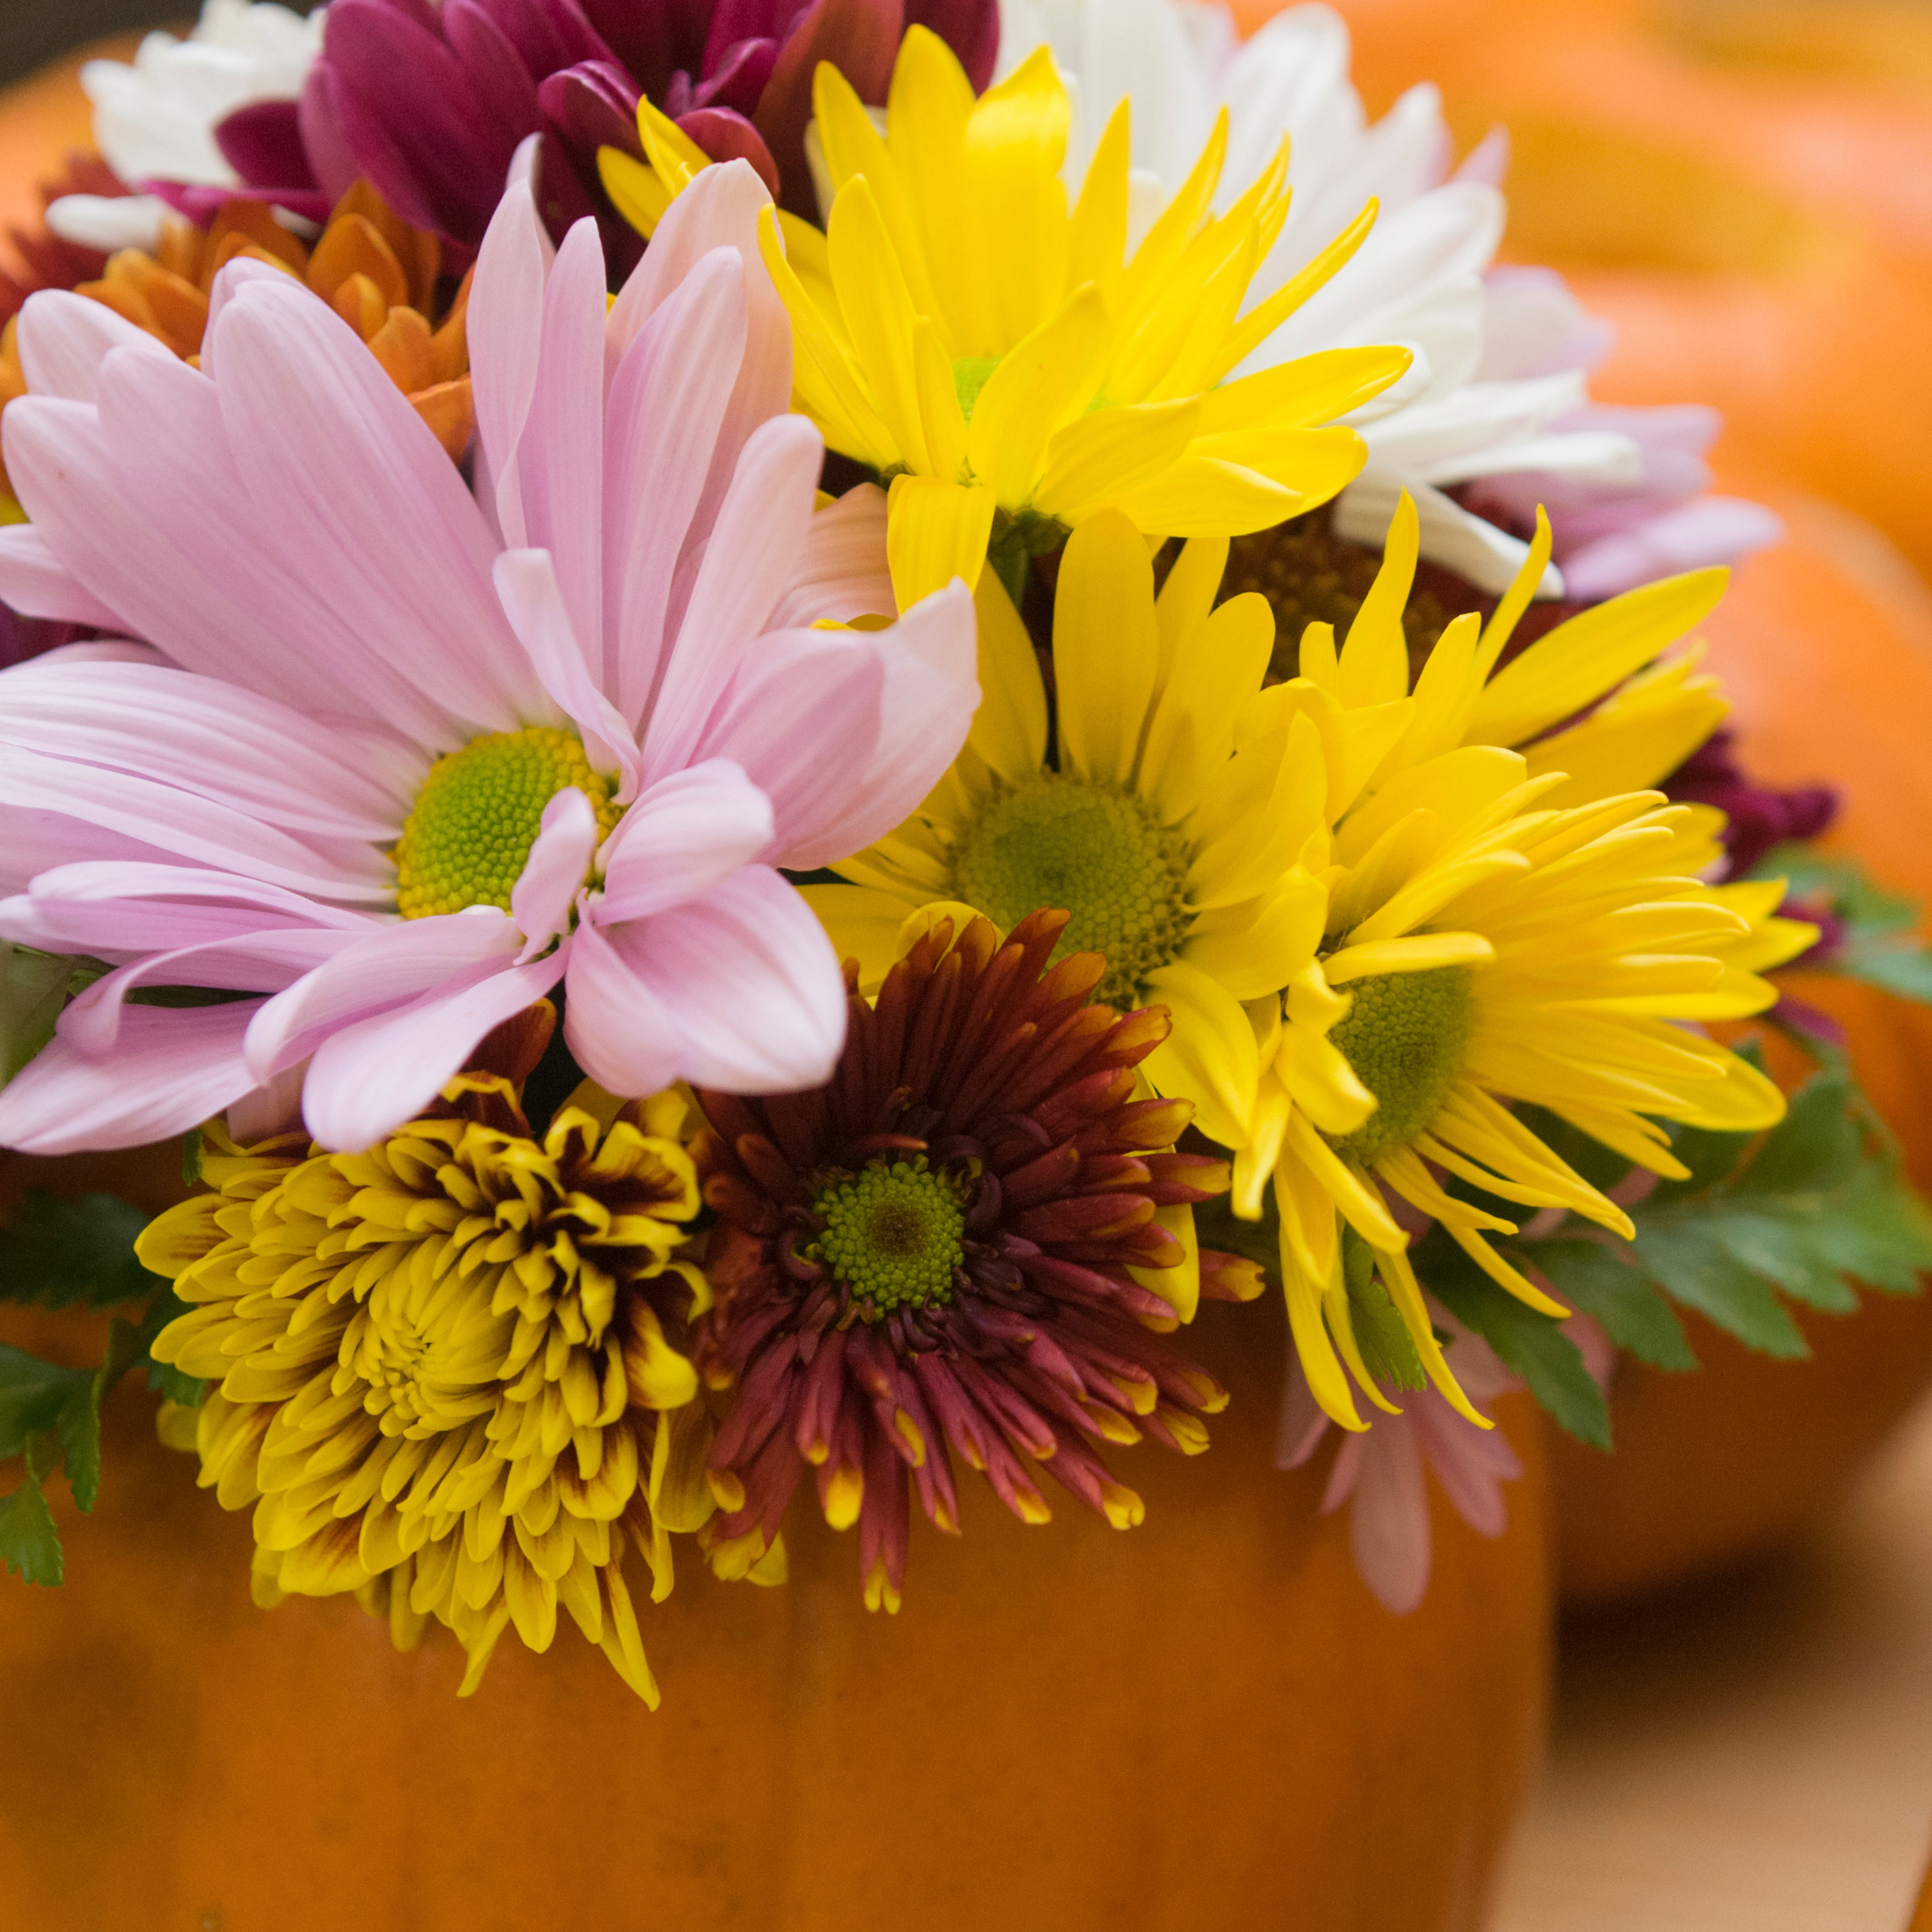 Fall Harvest Activities for Horticultural Therapy